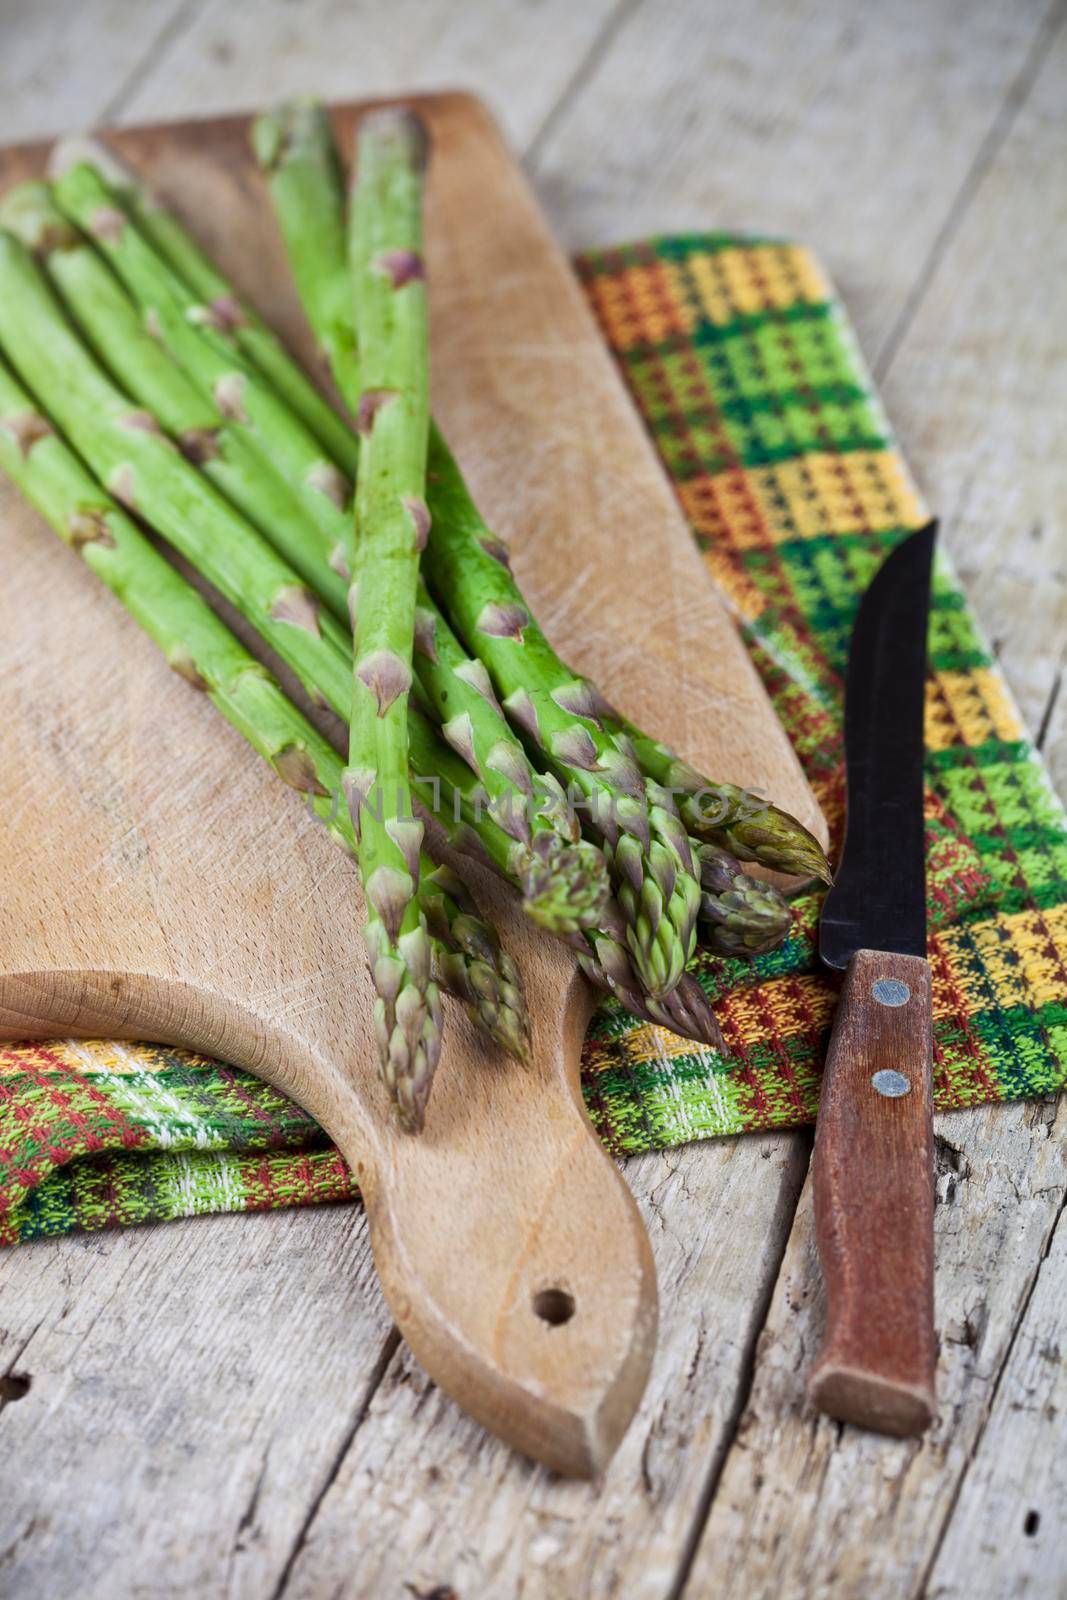 Raw garden asparagus and knife closeup on cutting board on rustic wooden table background.  by marylooo